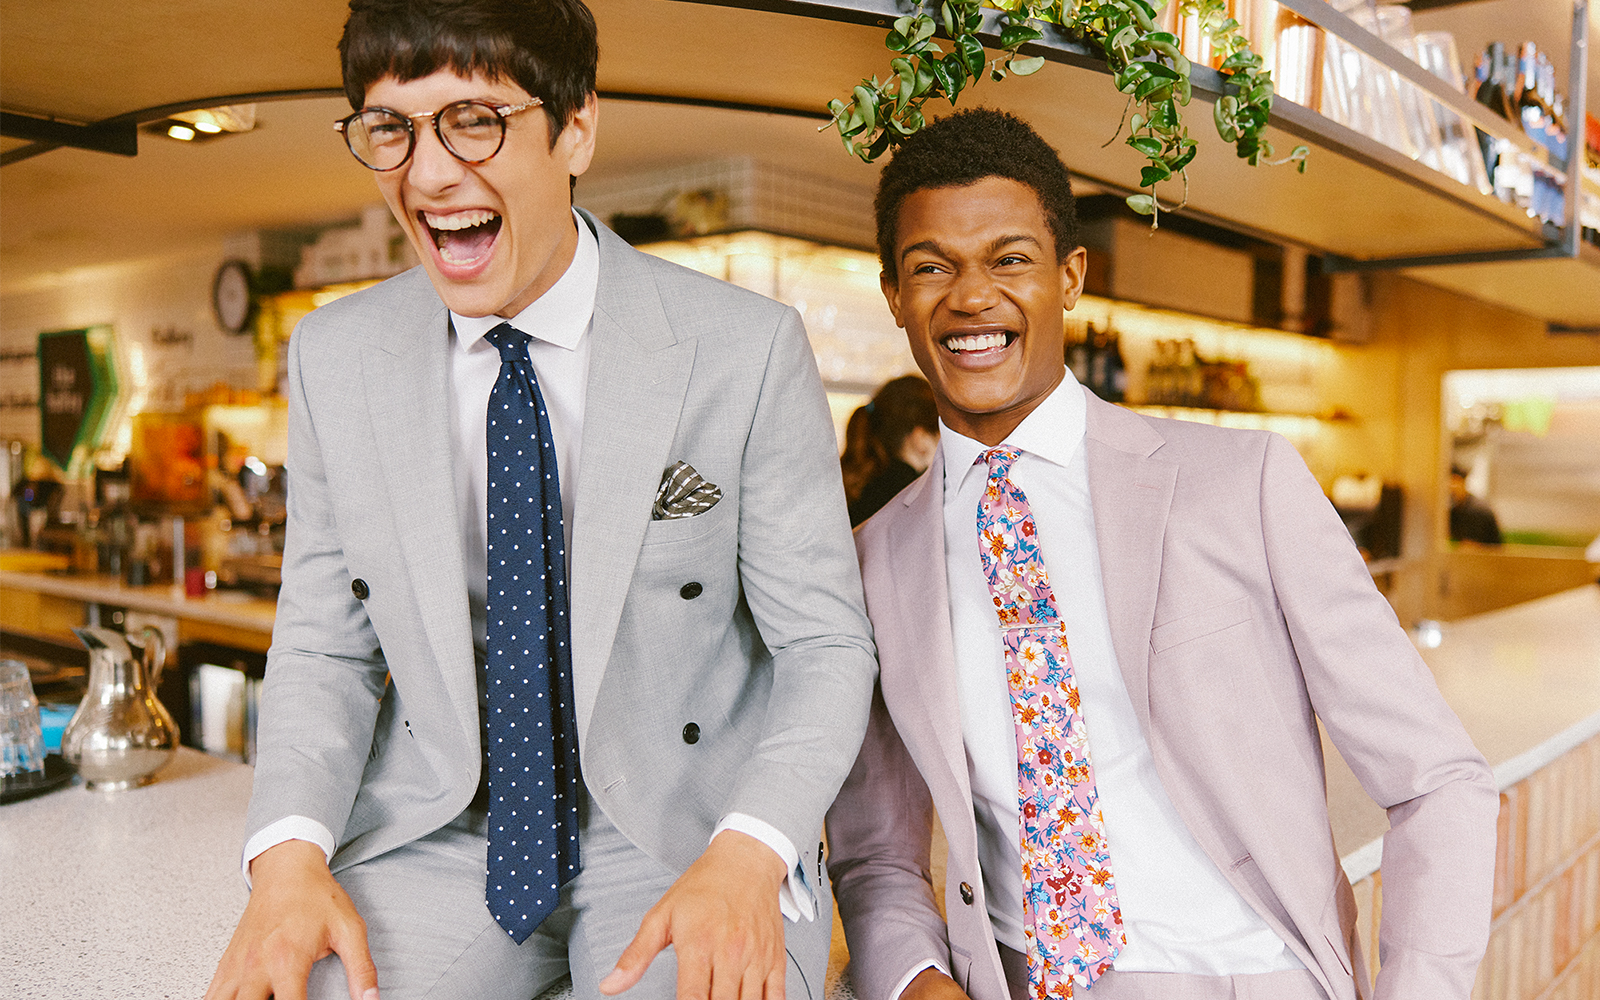 Men laughing at a wedding in grey summer suits and pocket squares and patterned ties 